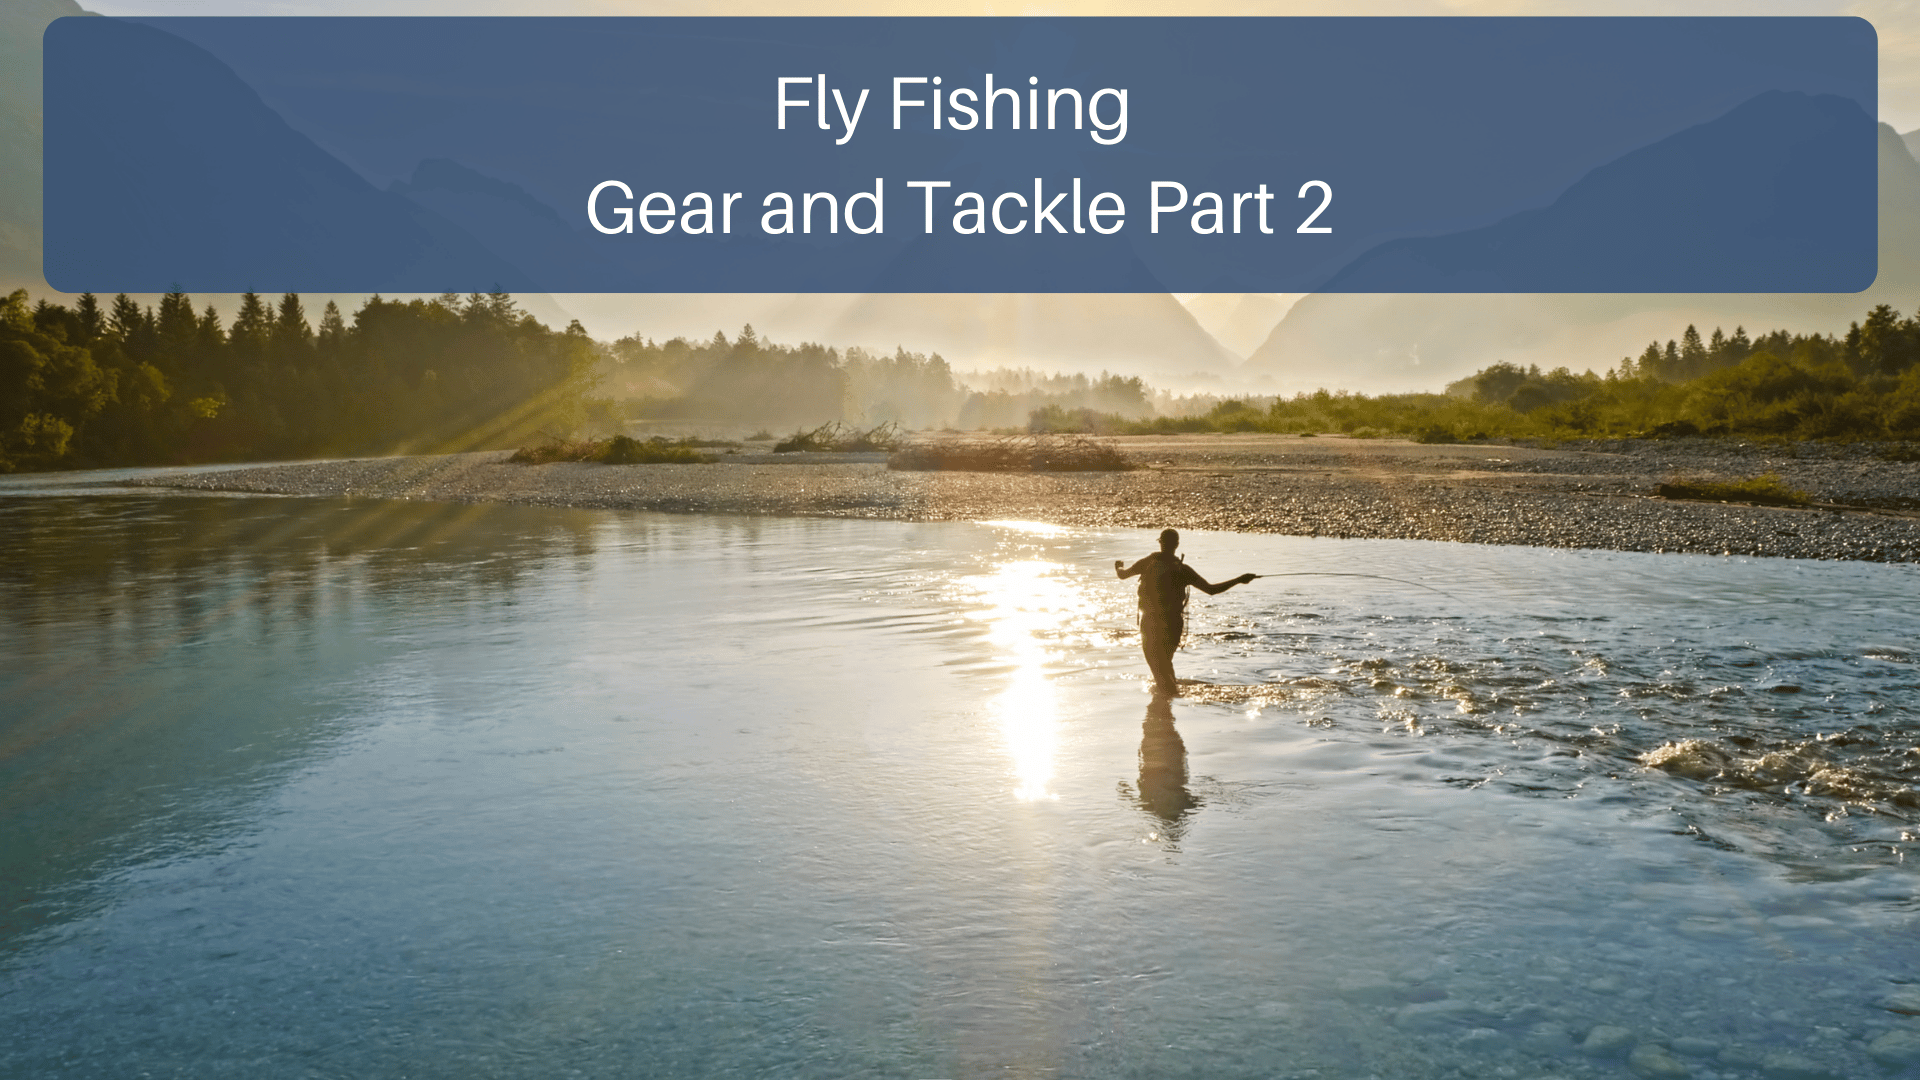  Fly Fishing Gear & Tackle: Part 2